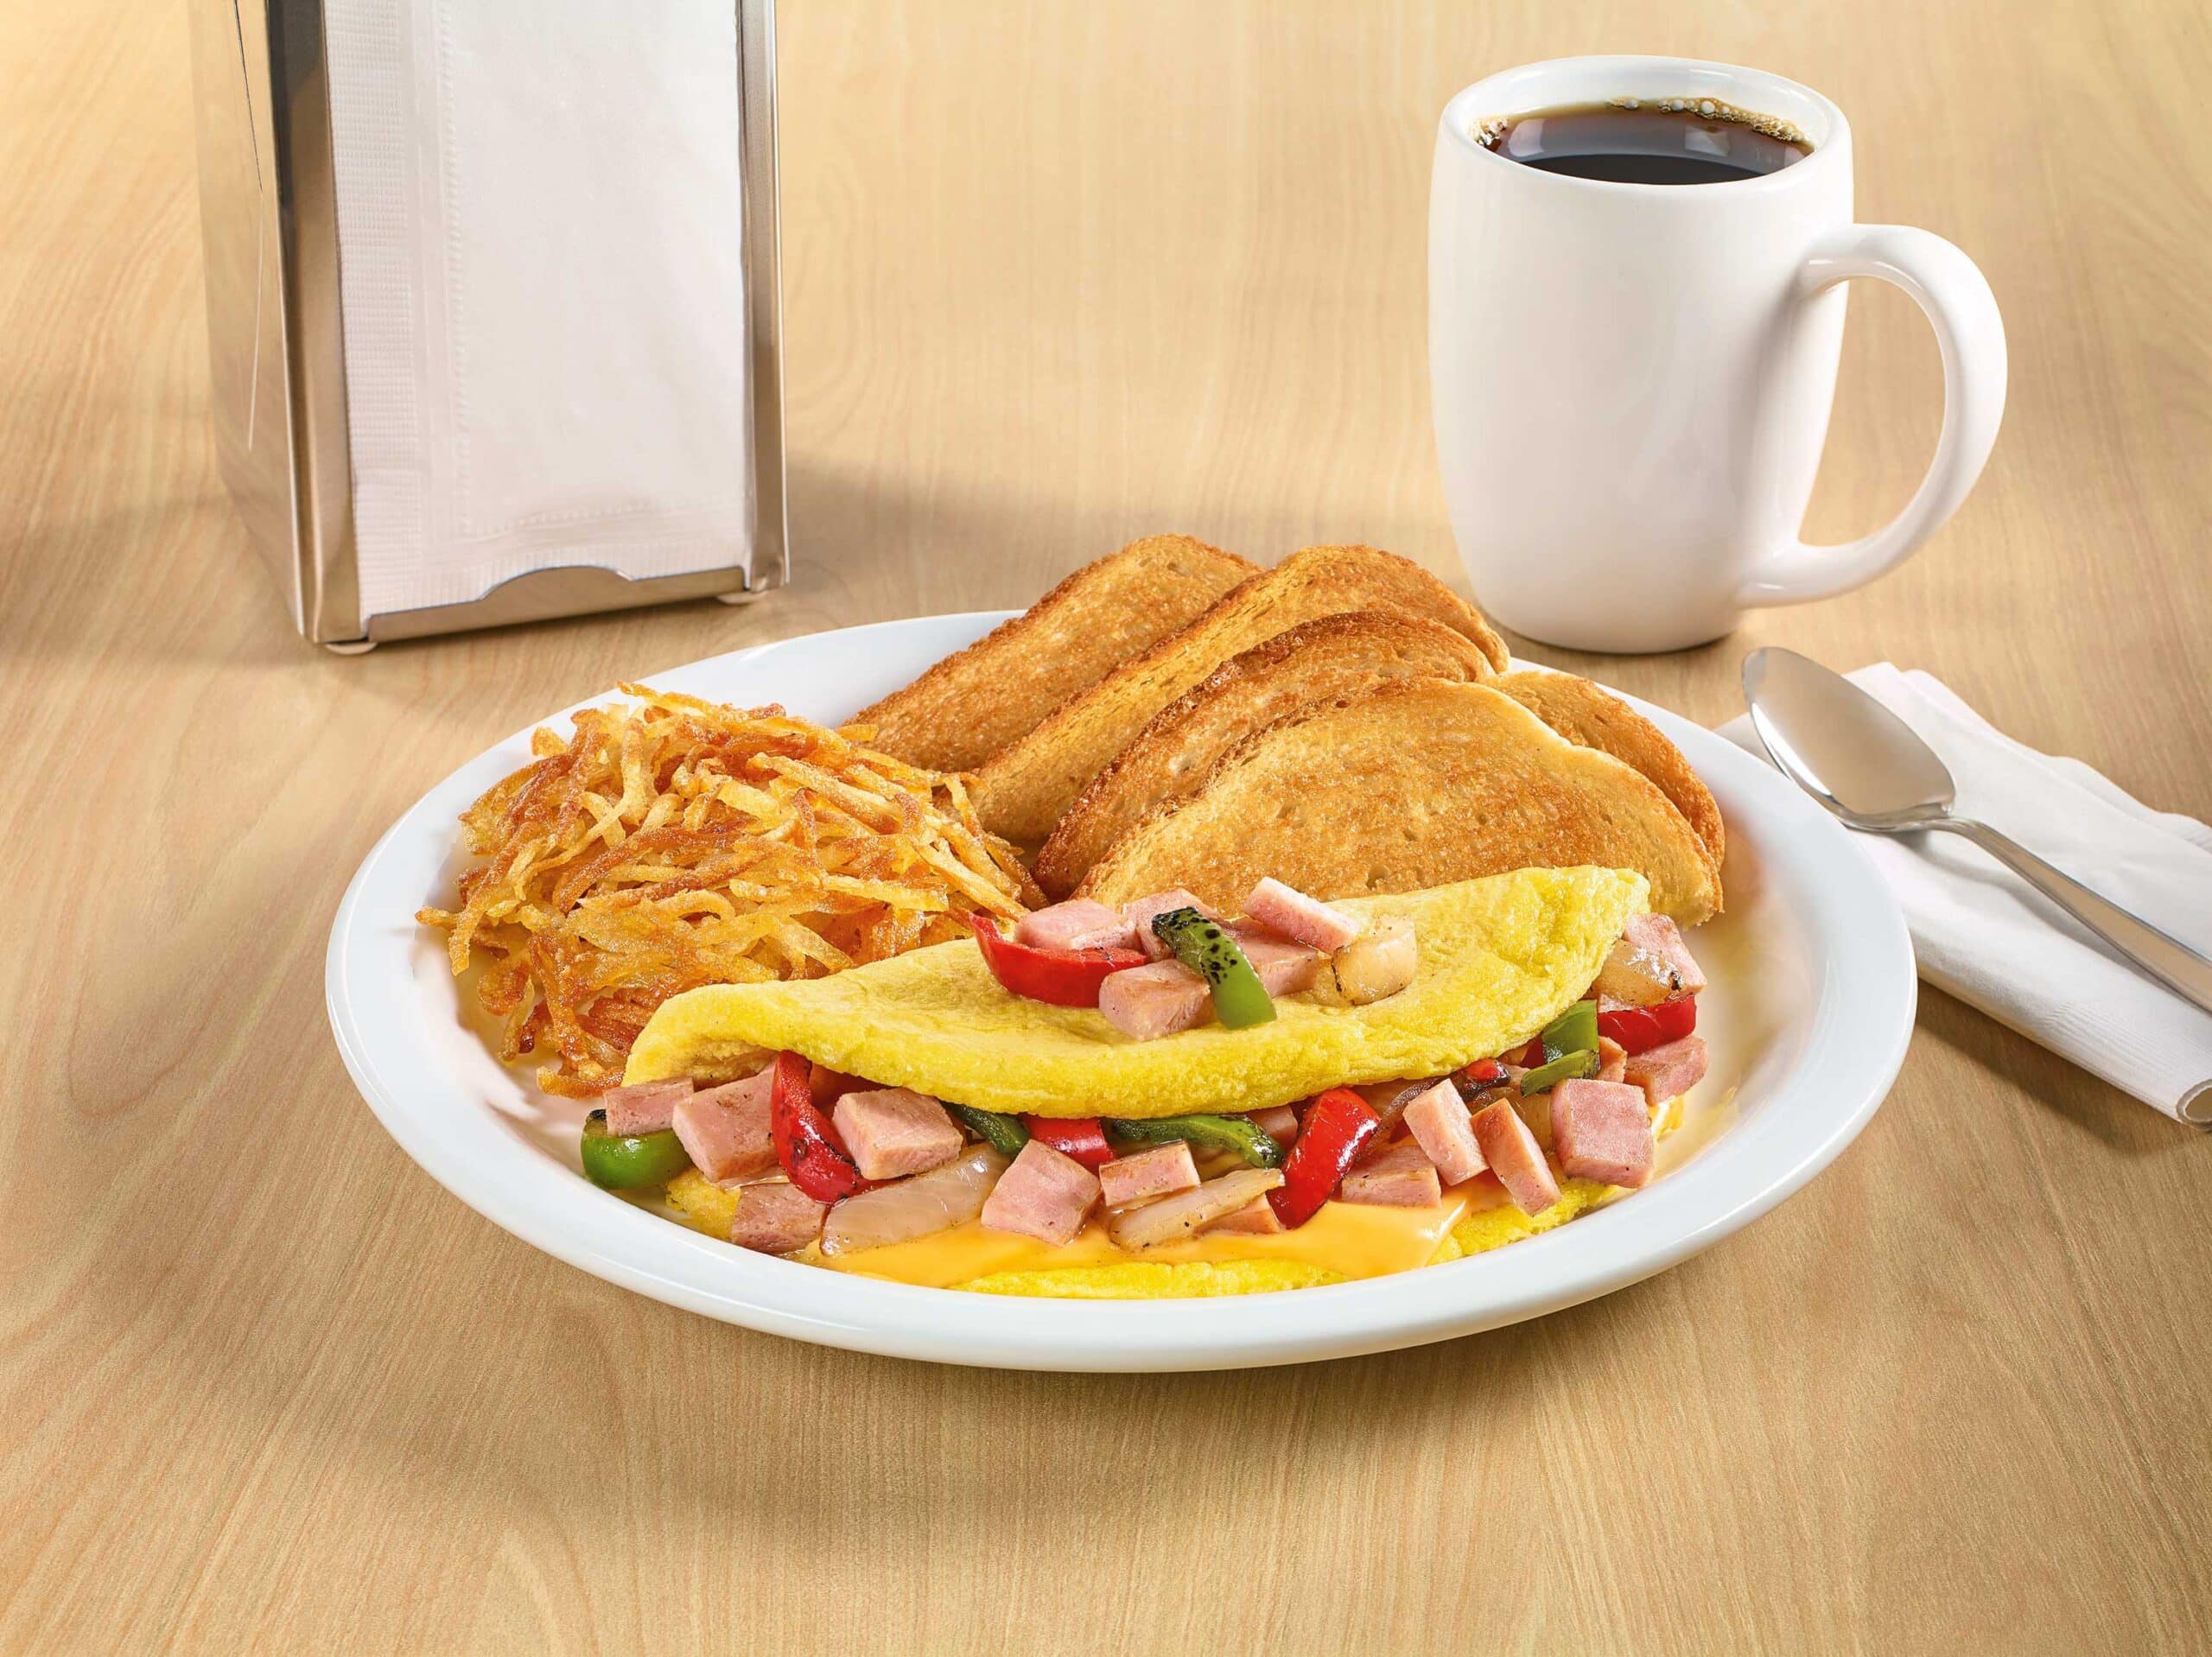 Inspired By An Omelet: The Attraction of Denny's For Seniors